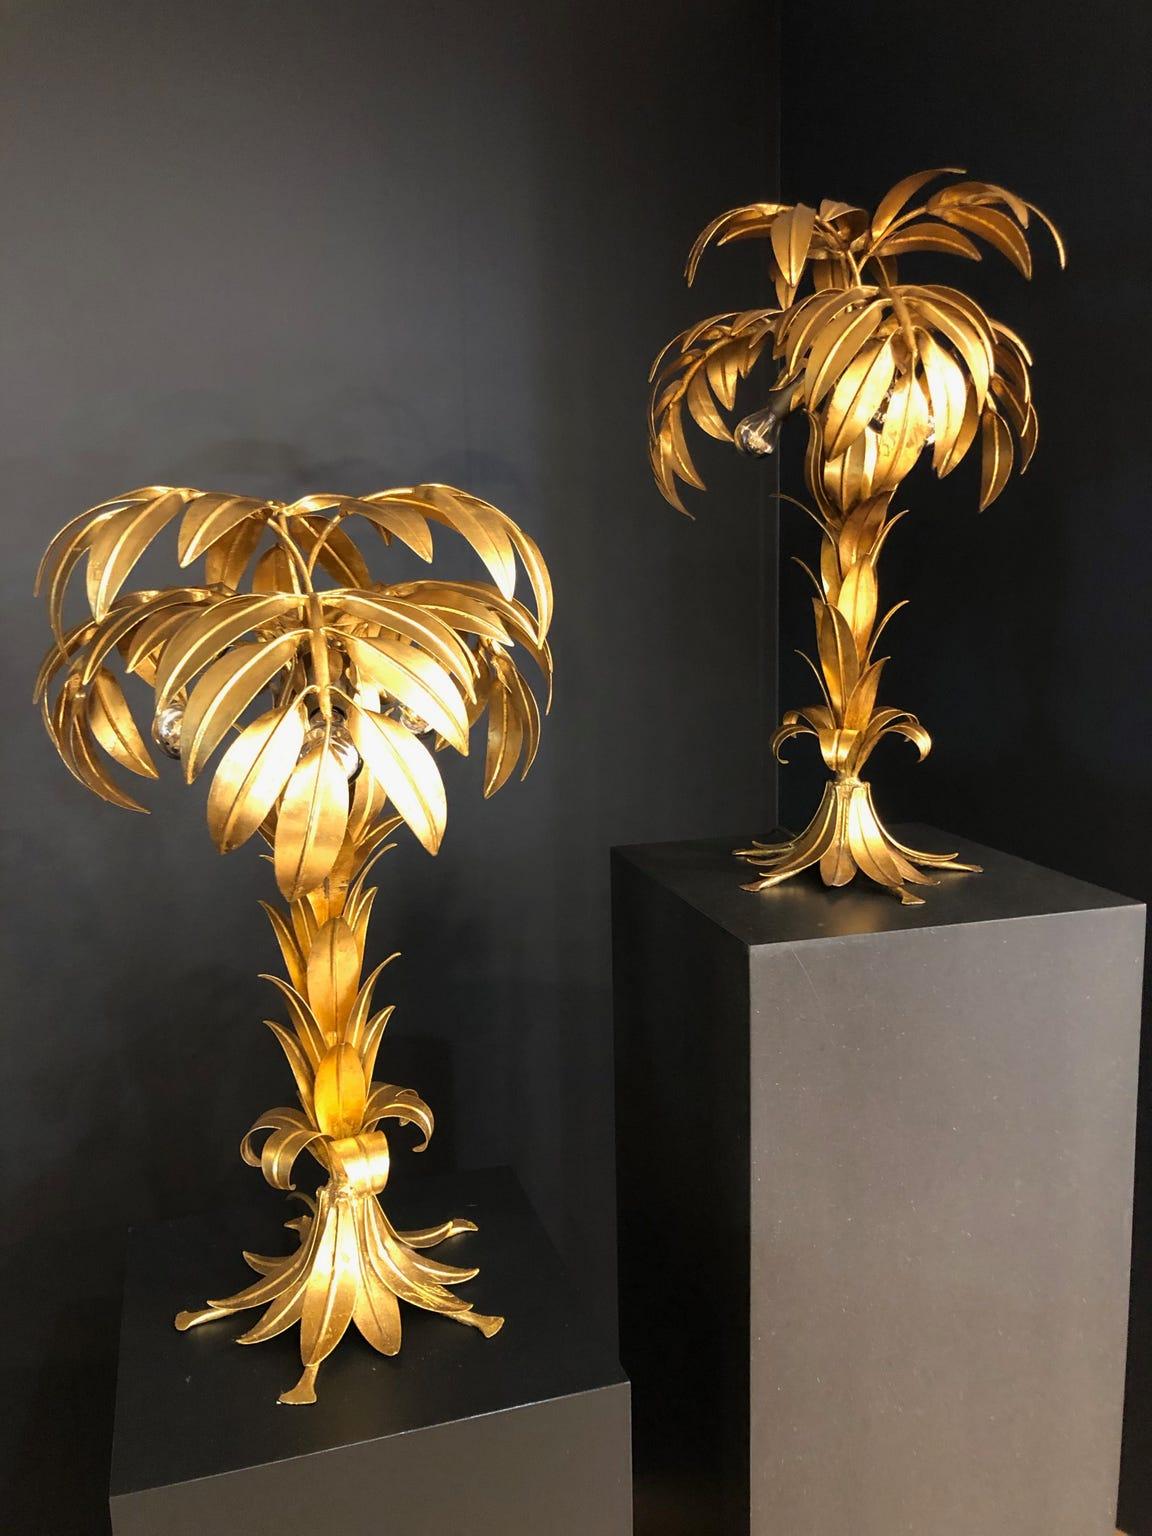 Two Hollywood Regency table lamps by Hans Kögl.
Measures: H: 70 cm – D: 45 cm – W: 45 cm
H: 65 cm – D: 40 cm – W: 40 cm.